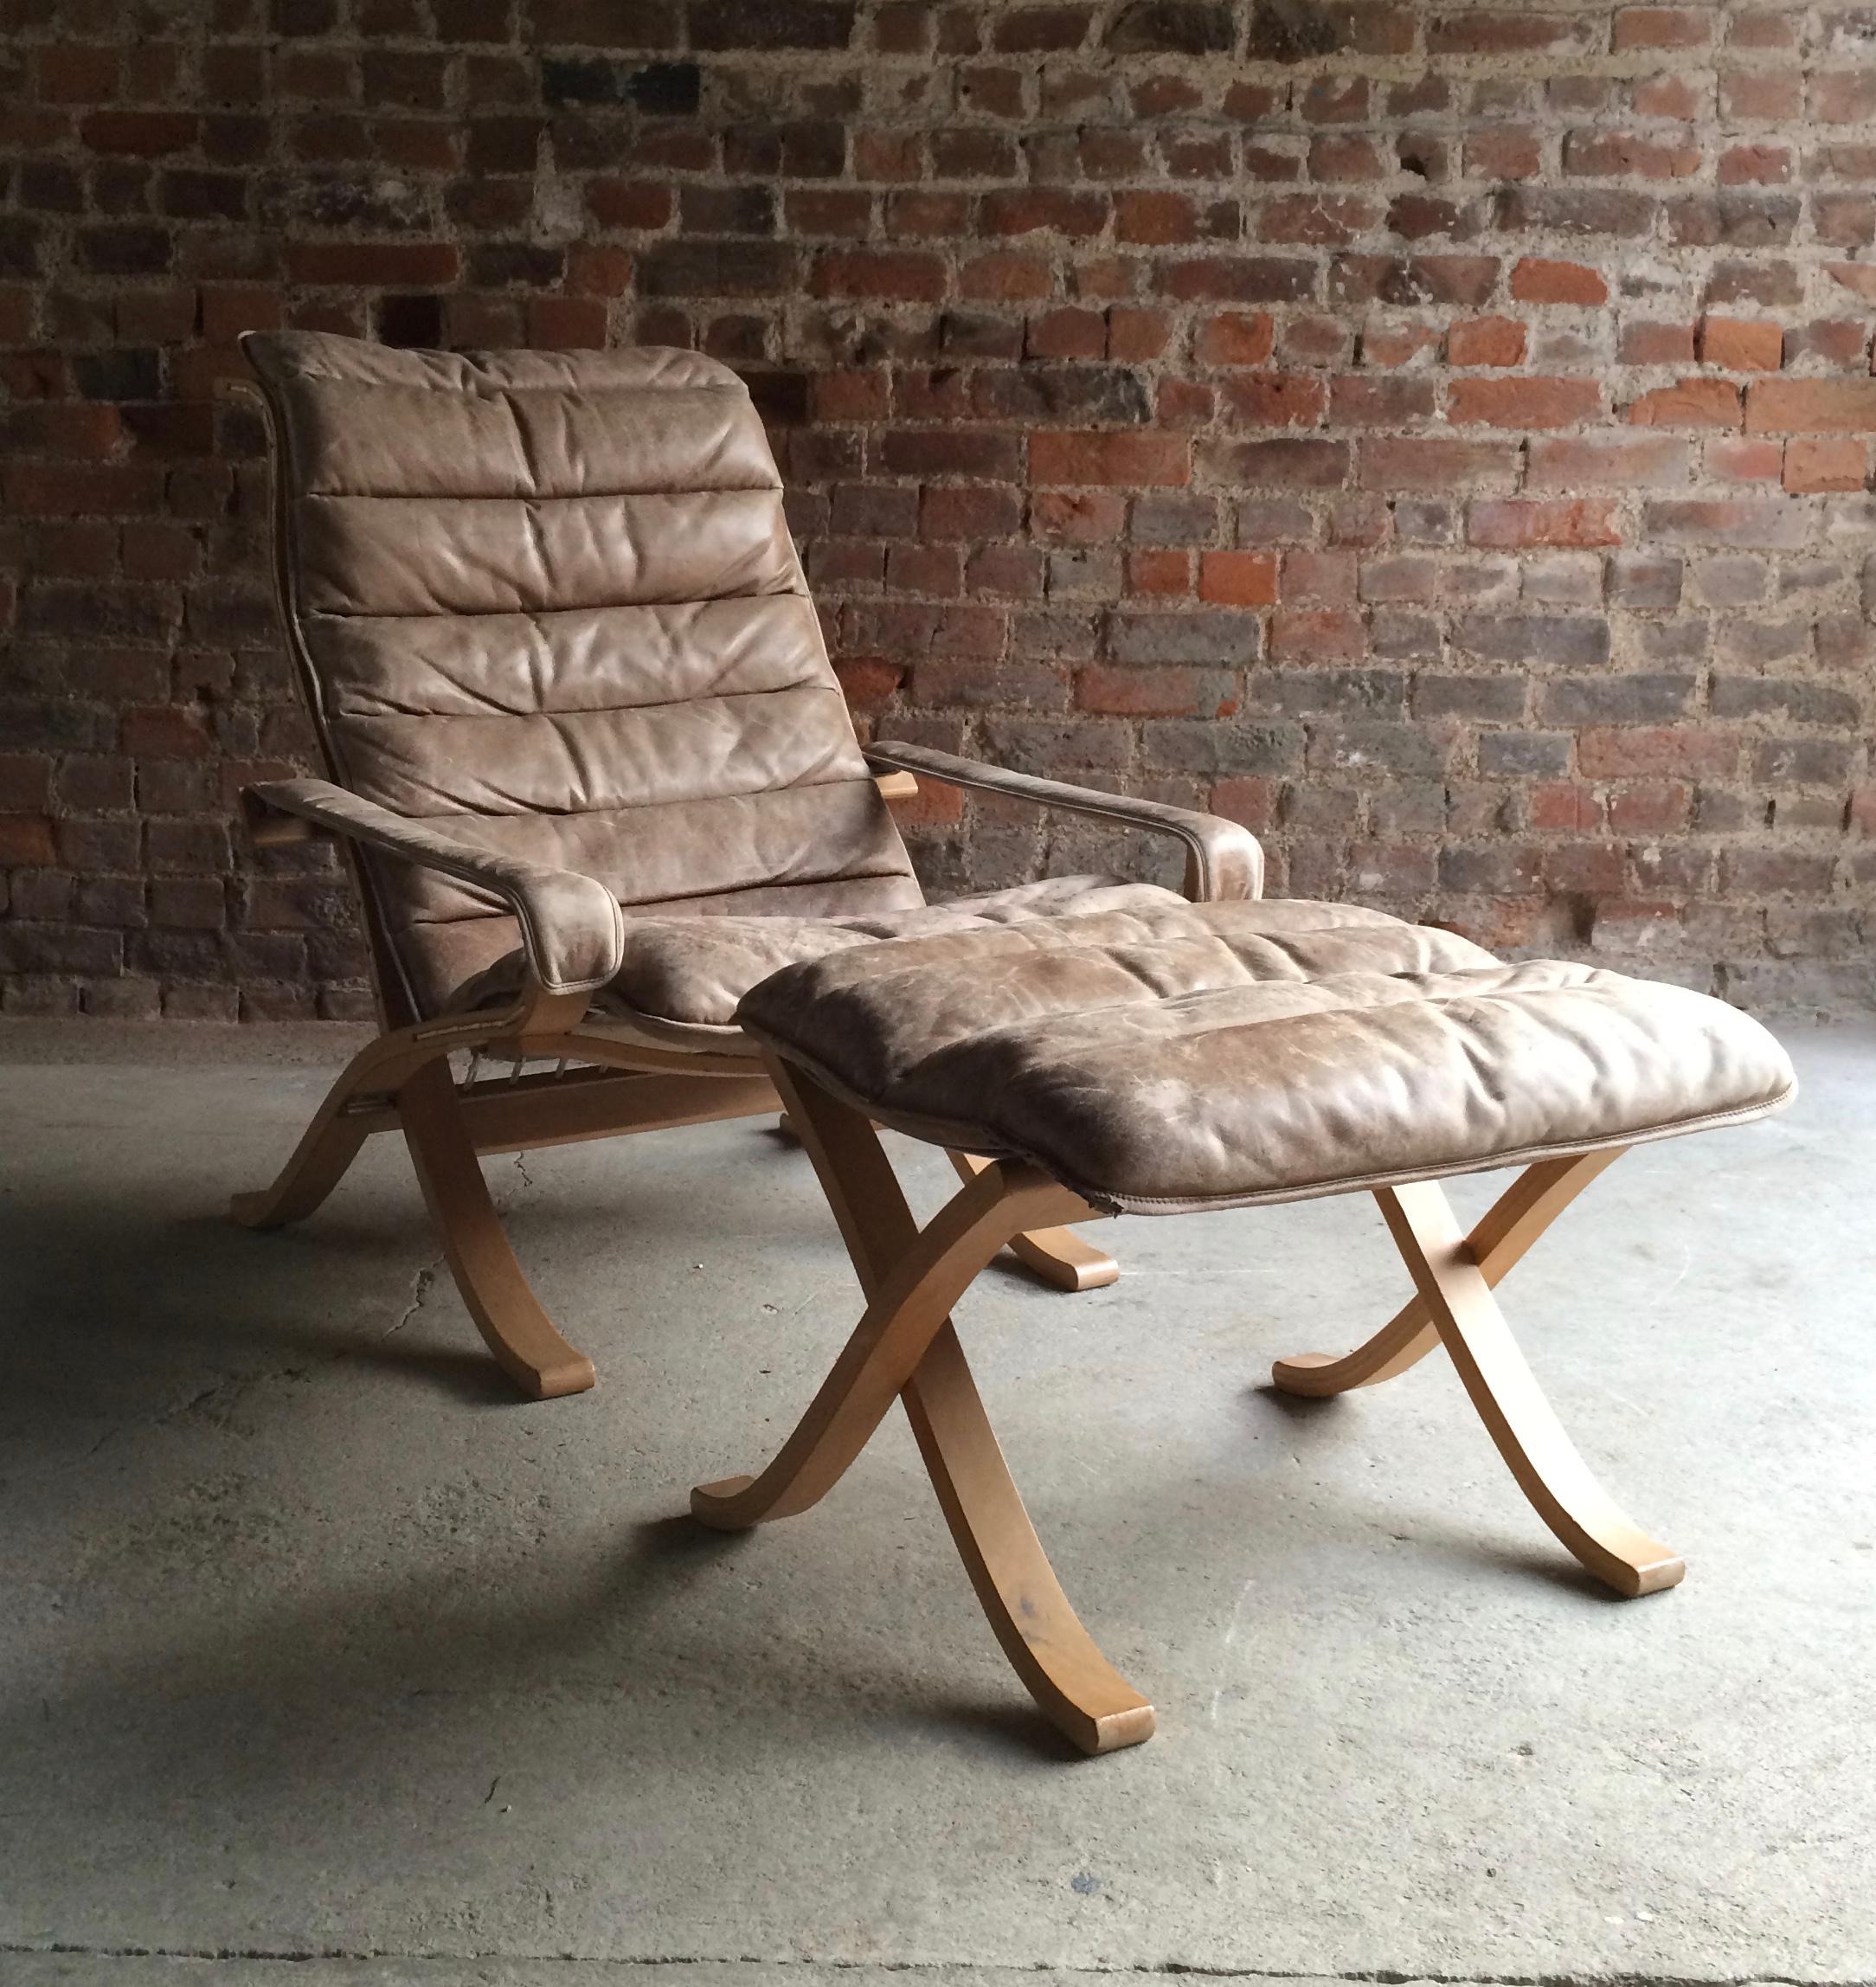 Fabulous midcentury Norwegian Ingmar Relling design for Westnofa Siesta leather Flex lounge chair with matching ottoman, circa 1960, wonderful campaign style with folding frame and leather strap to arms, quilted light brown removable leather